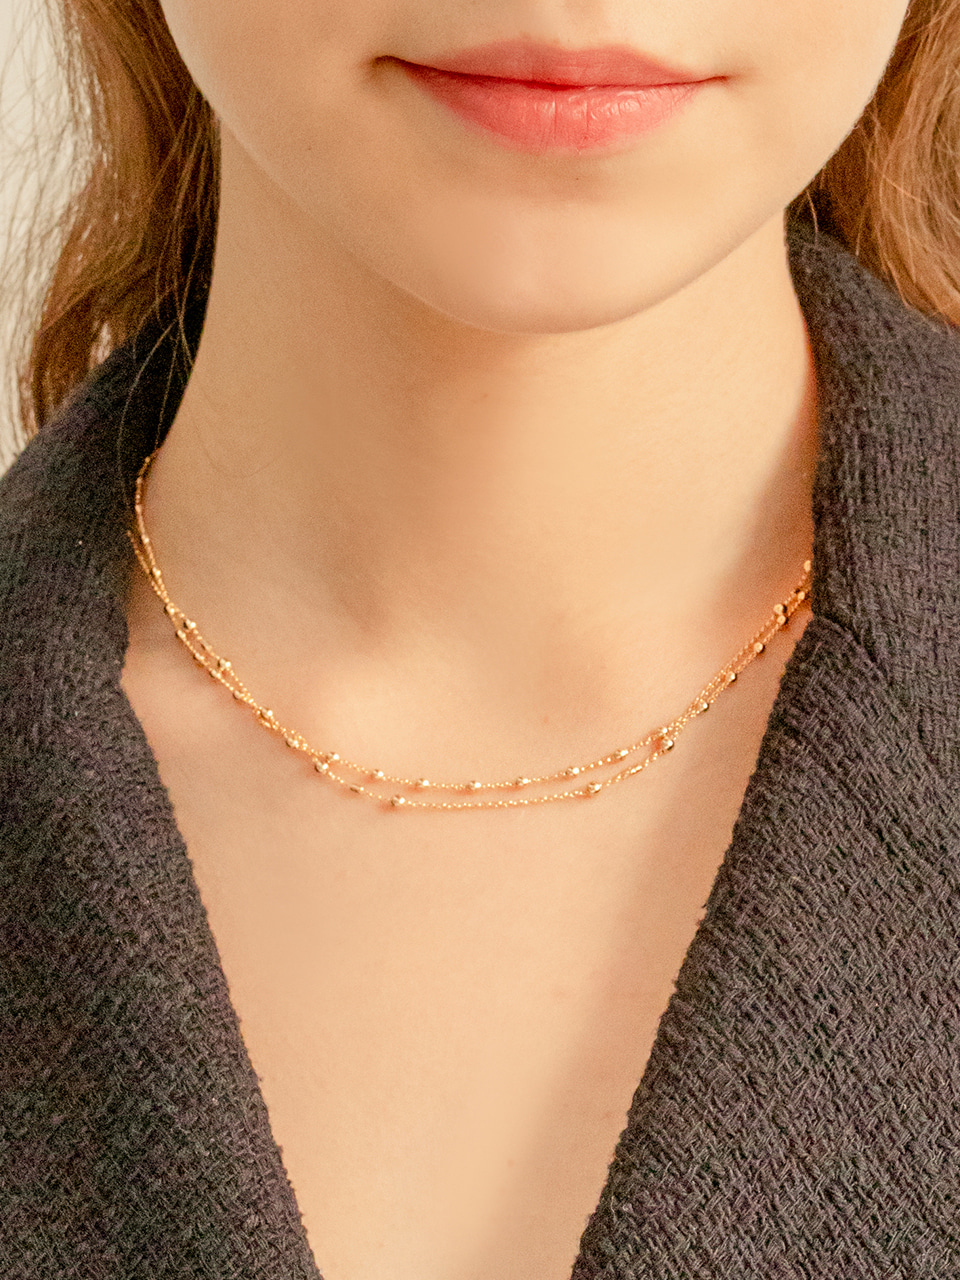 daily ball layered necklace